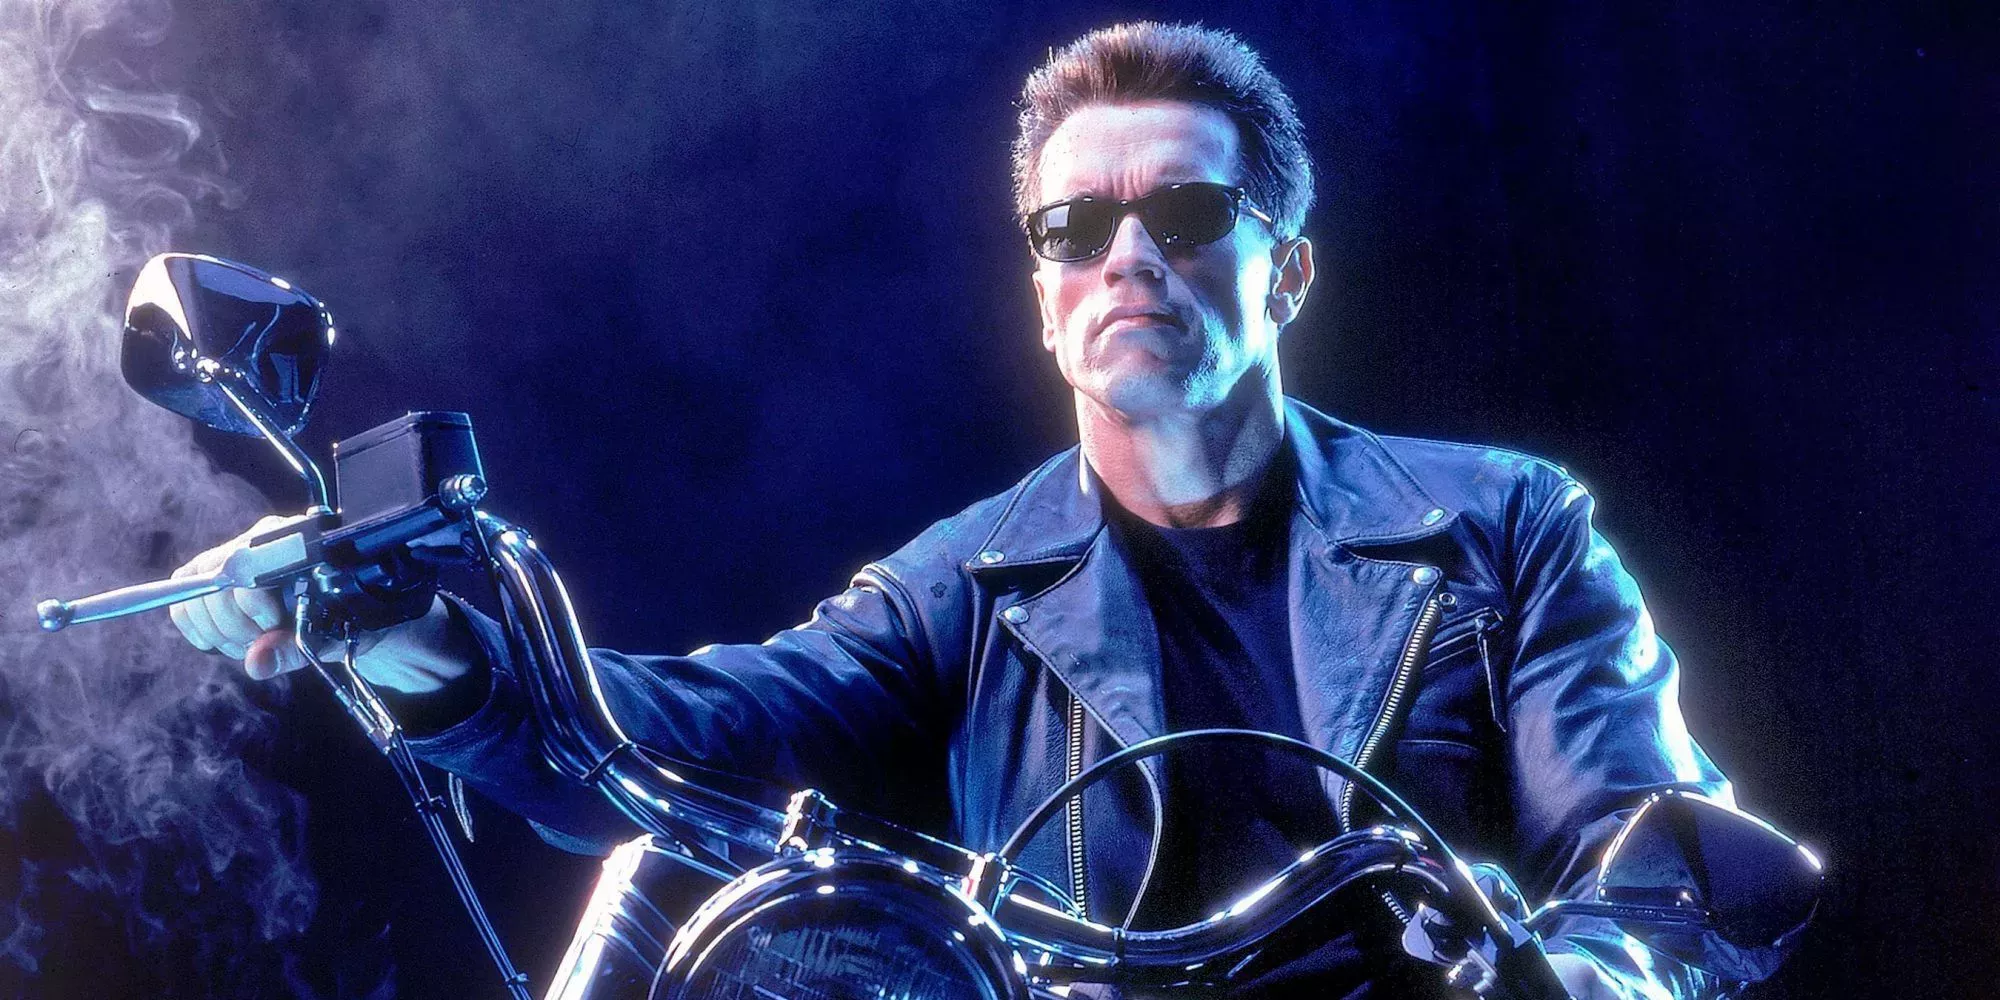 Arnold Schwarzenegger's T-800 rides motorcycle in Terminator 2: Judgment Day